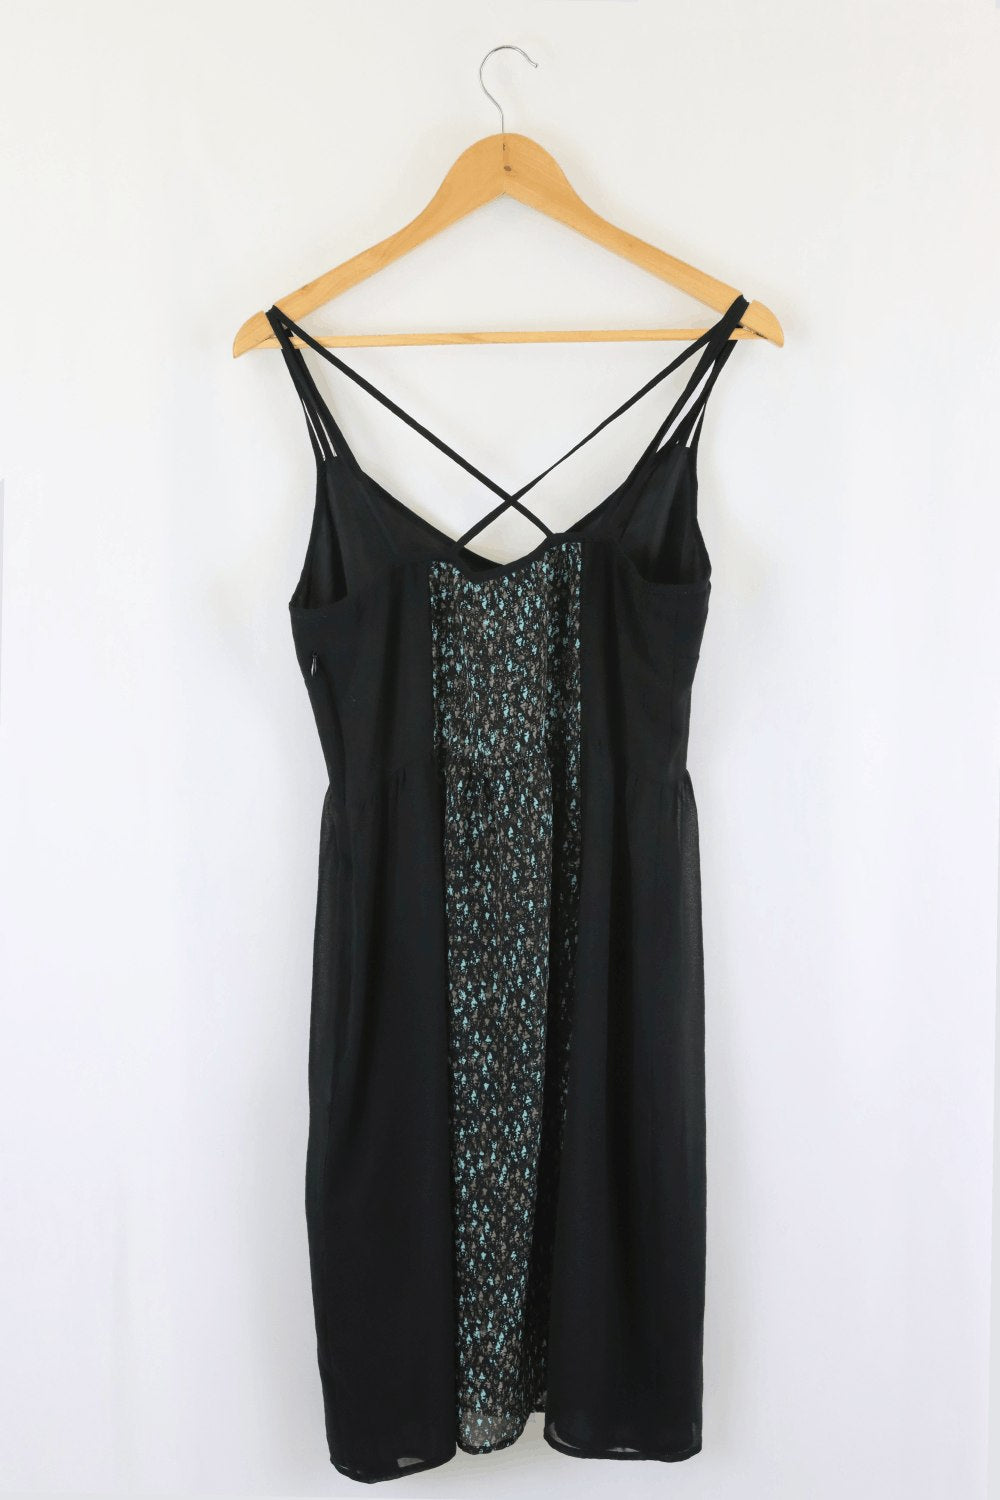 Jeanswest Black And Blue Floral Dress 10